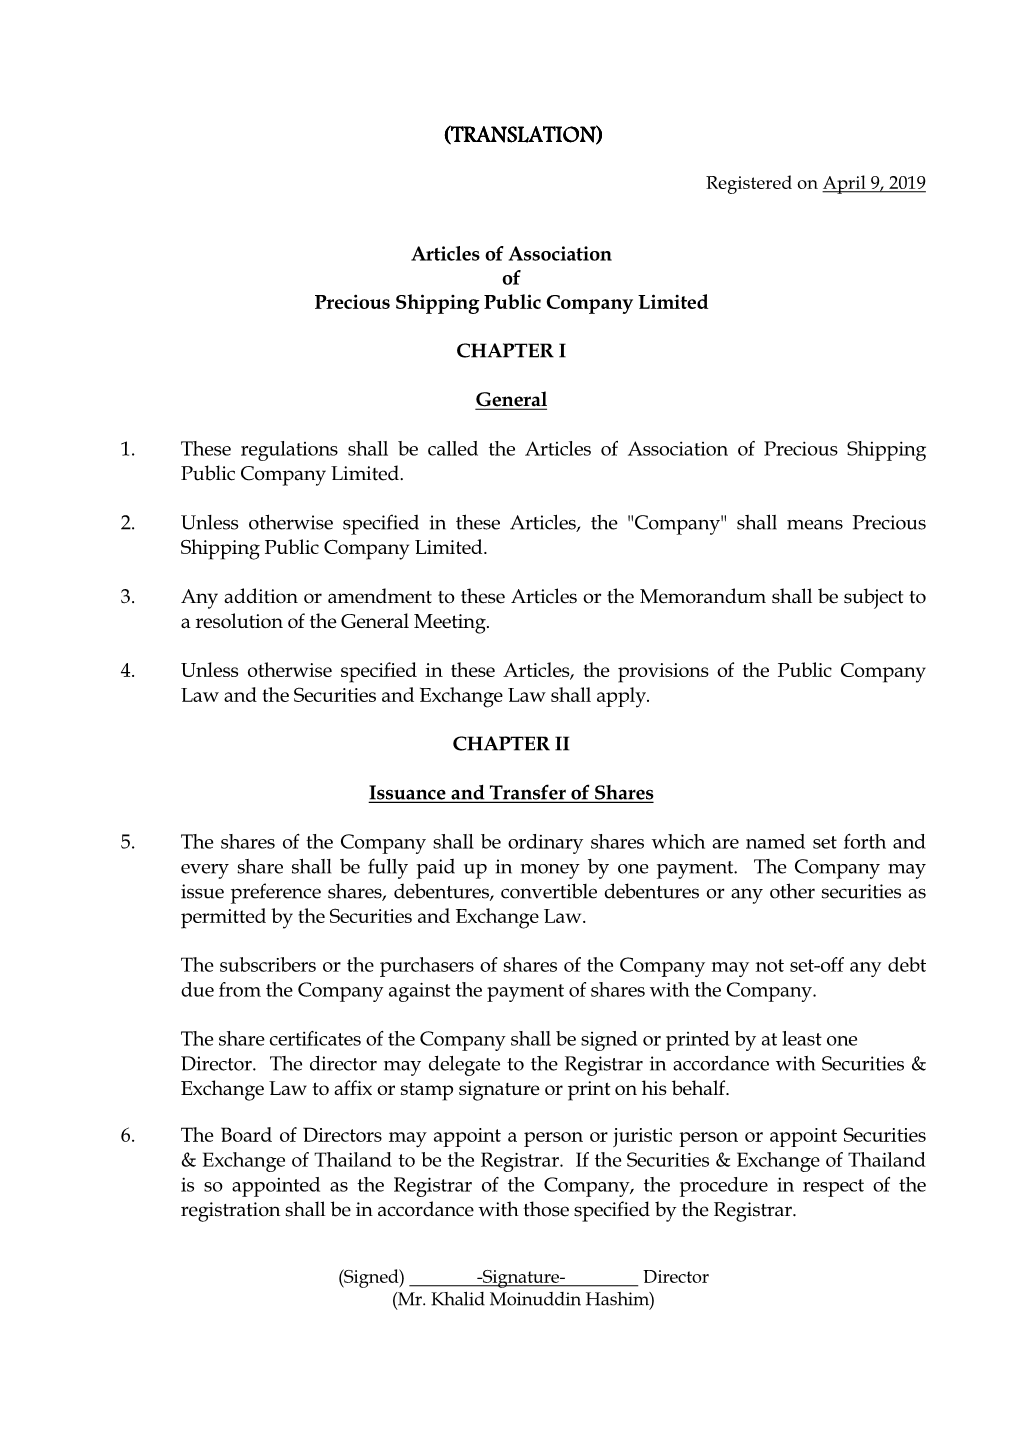 Articles of Association of Precious Shipping Public Company Limited